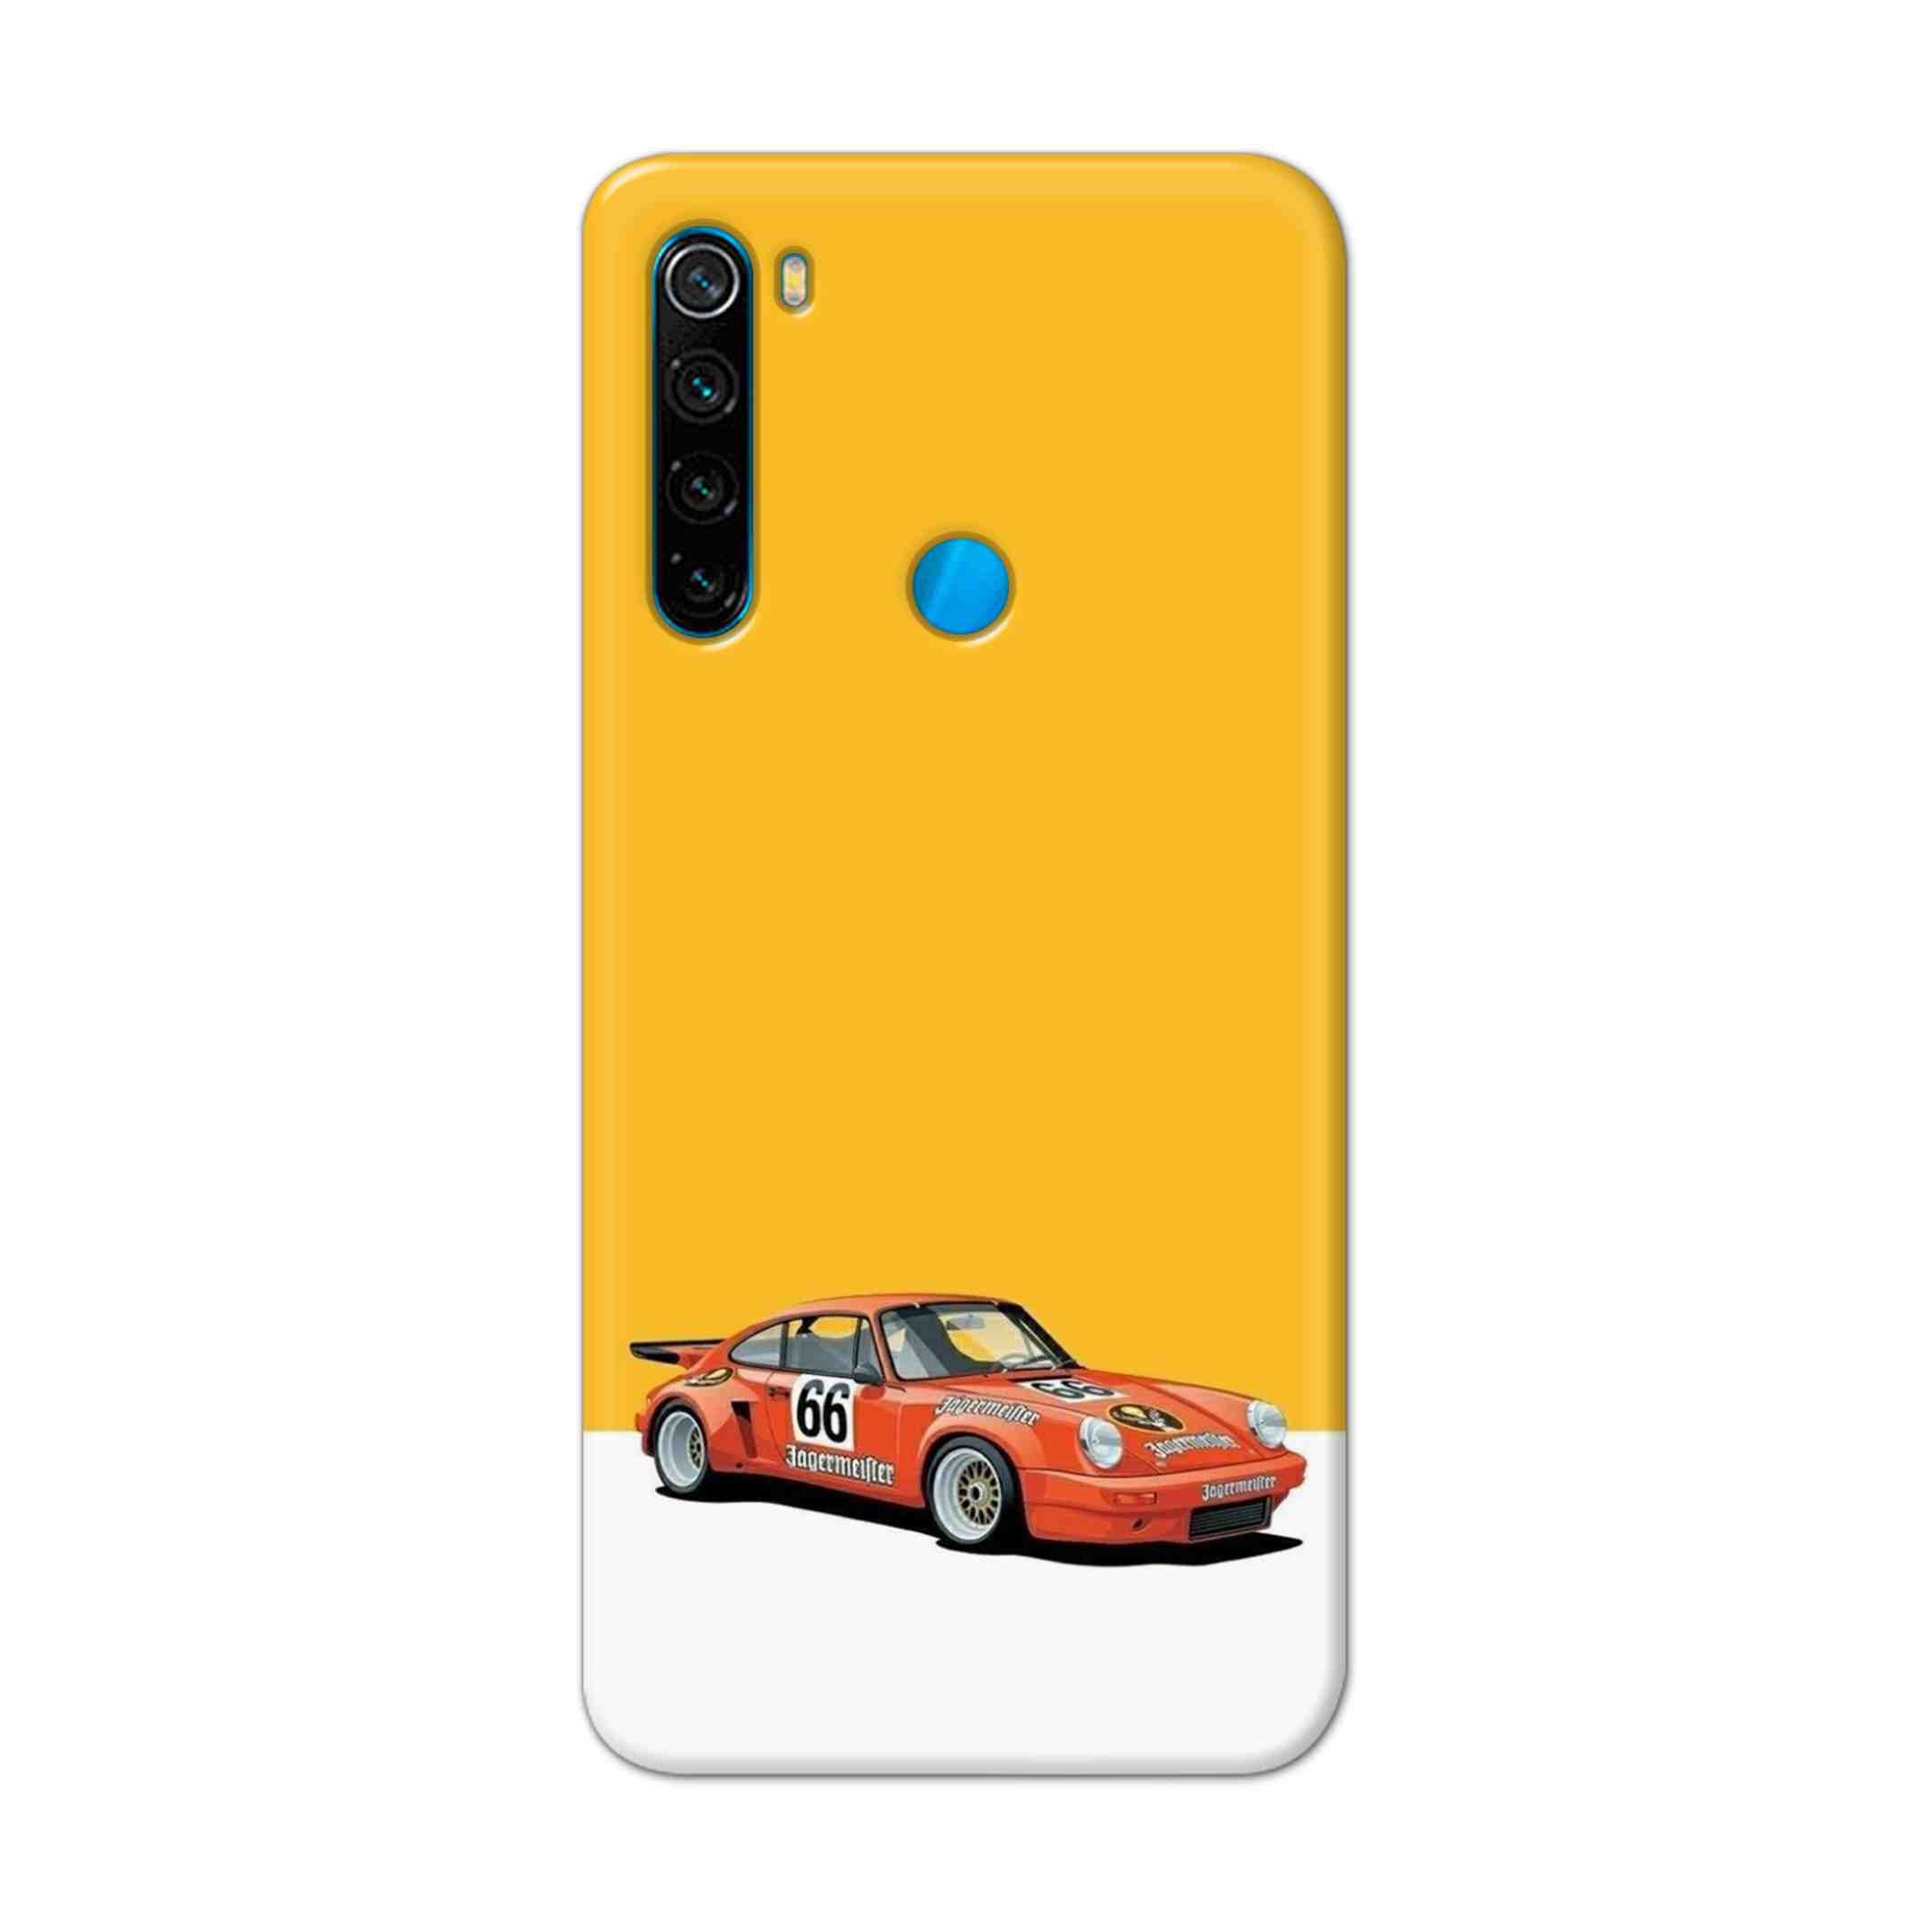 Buy Porche Hard Back Mobile Phone Case Cover For Xiaomi Redmi Note 8 Online